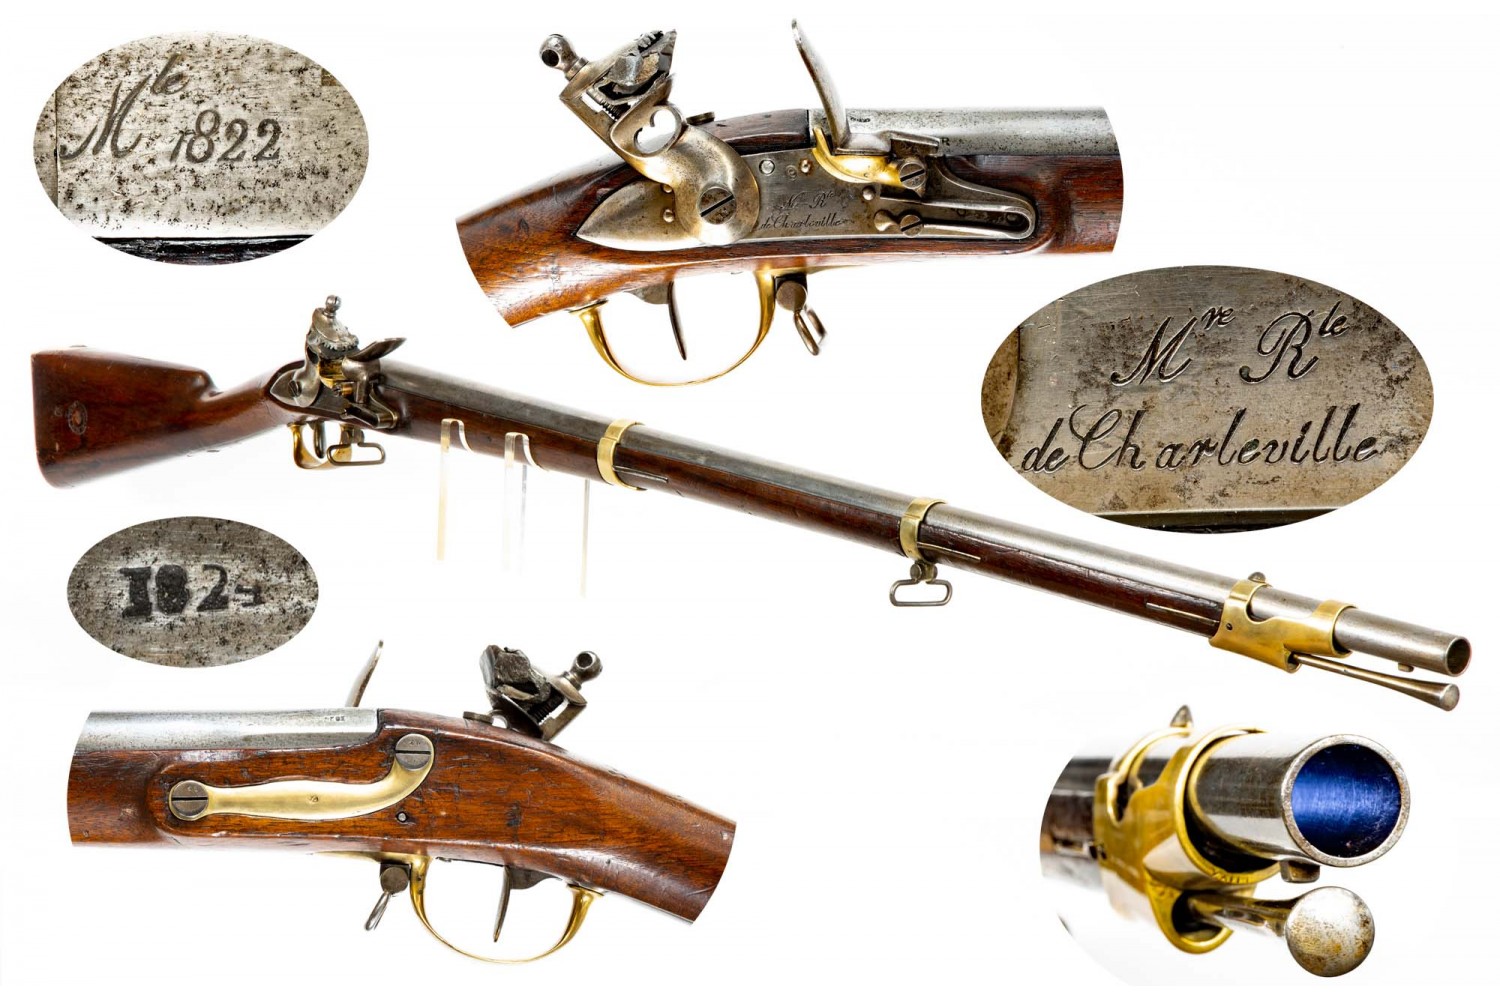 french musket 1777